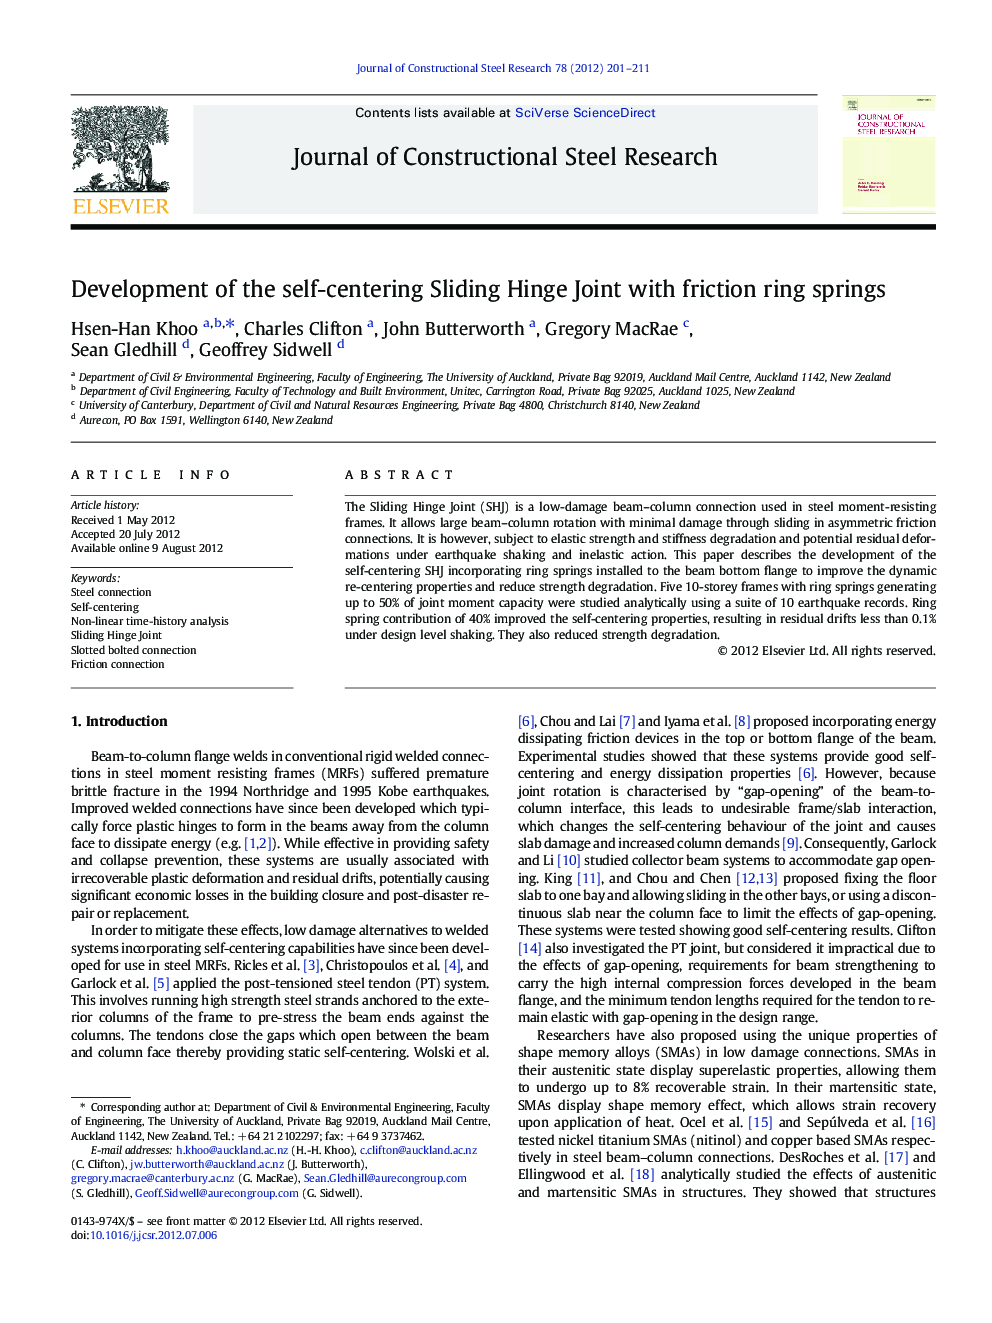 Development of the self-centering Sliding Hinge Joint with friction ring springs